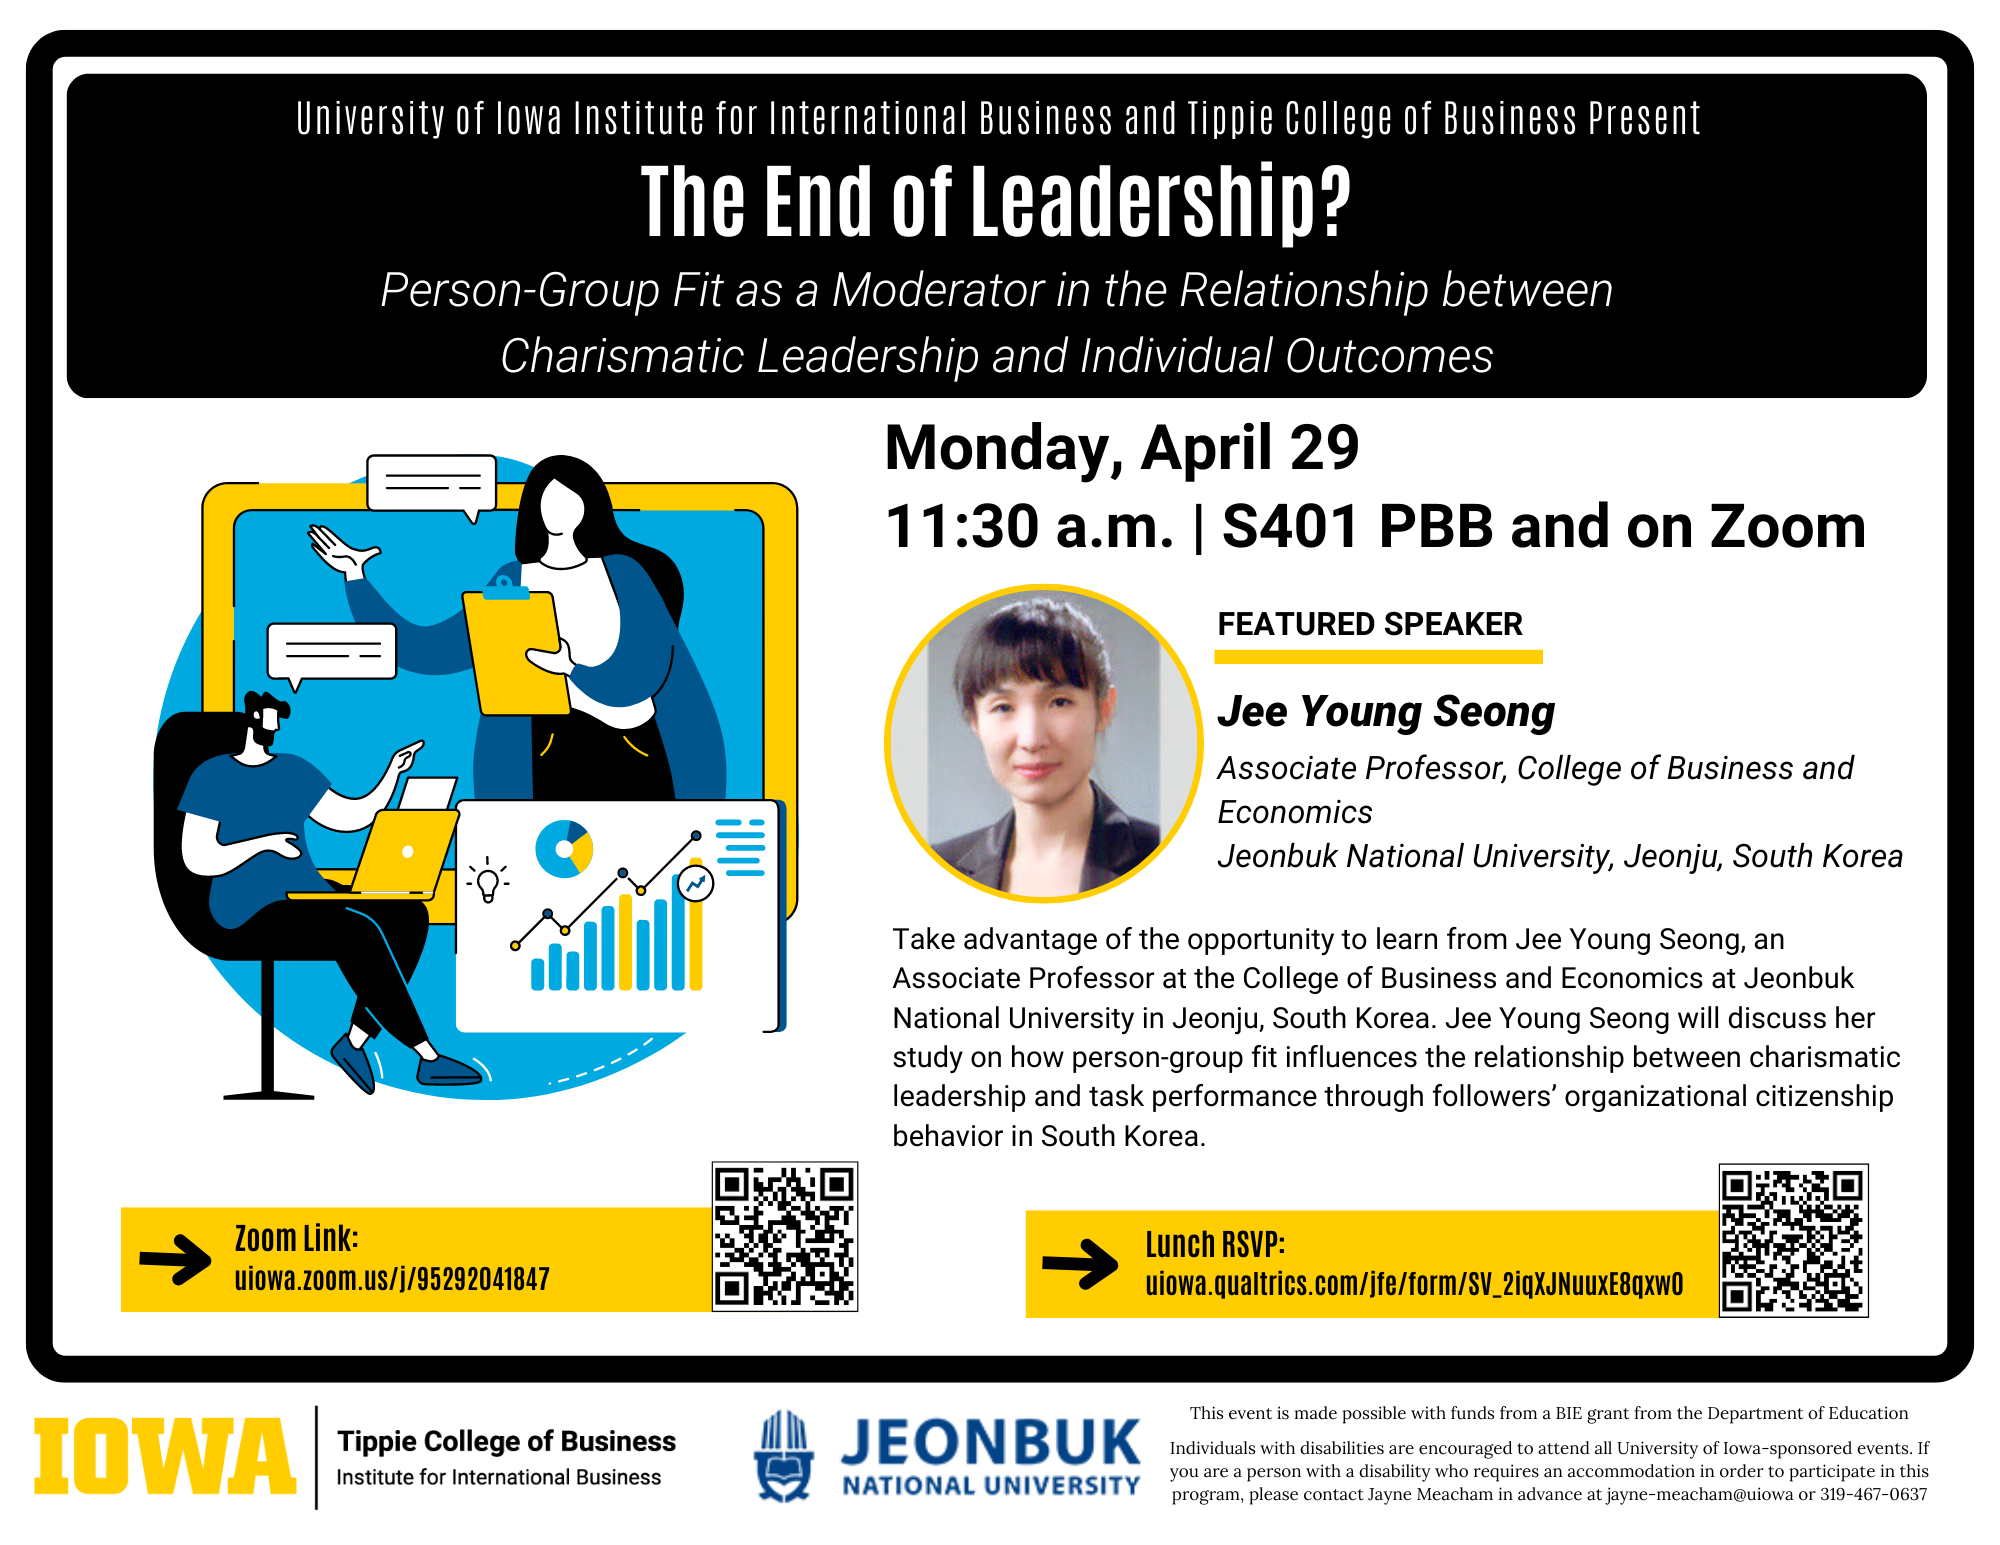 Take advantage of the opportunity to learn from Jee Young Seong, an Associate Professor at the College of Business and Economics at Jeonbuk National University in Jeonju, South Korea. 